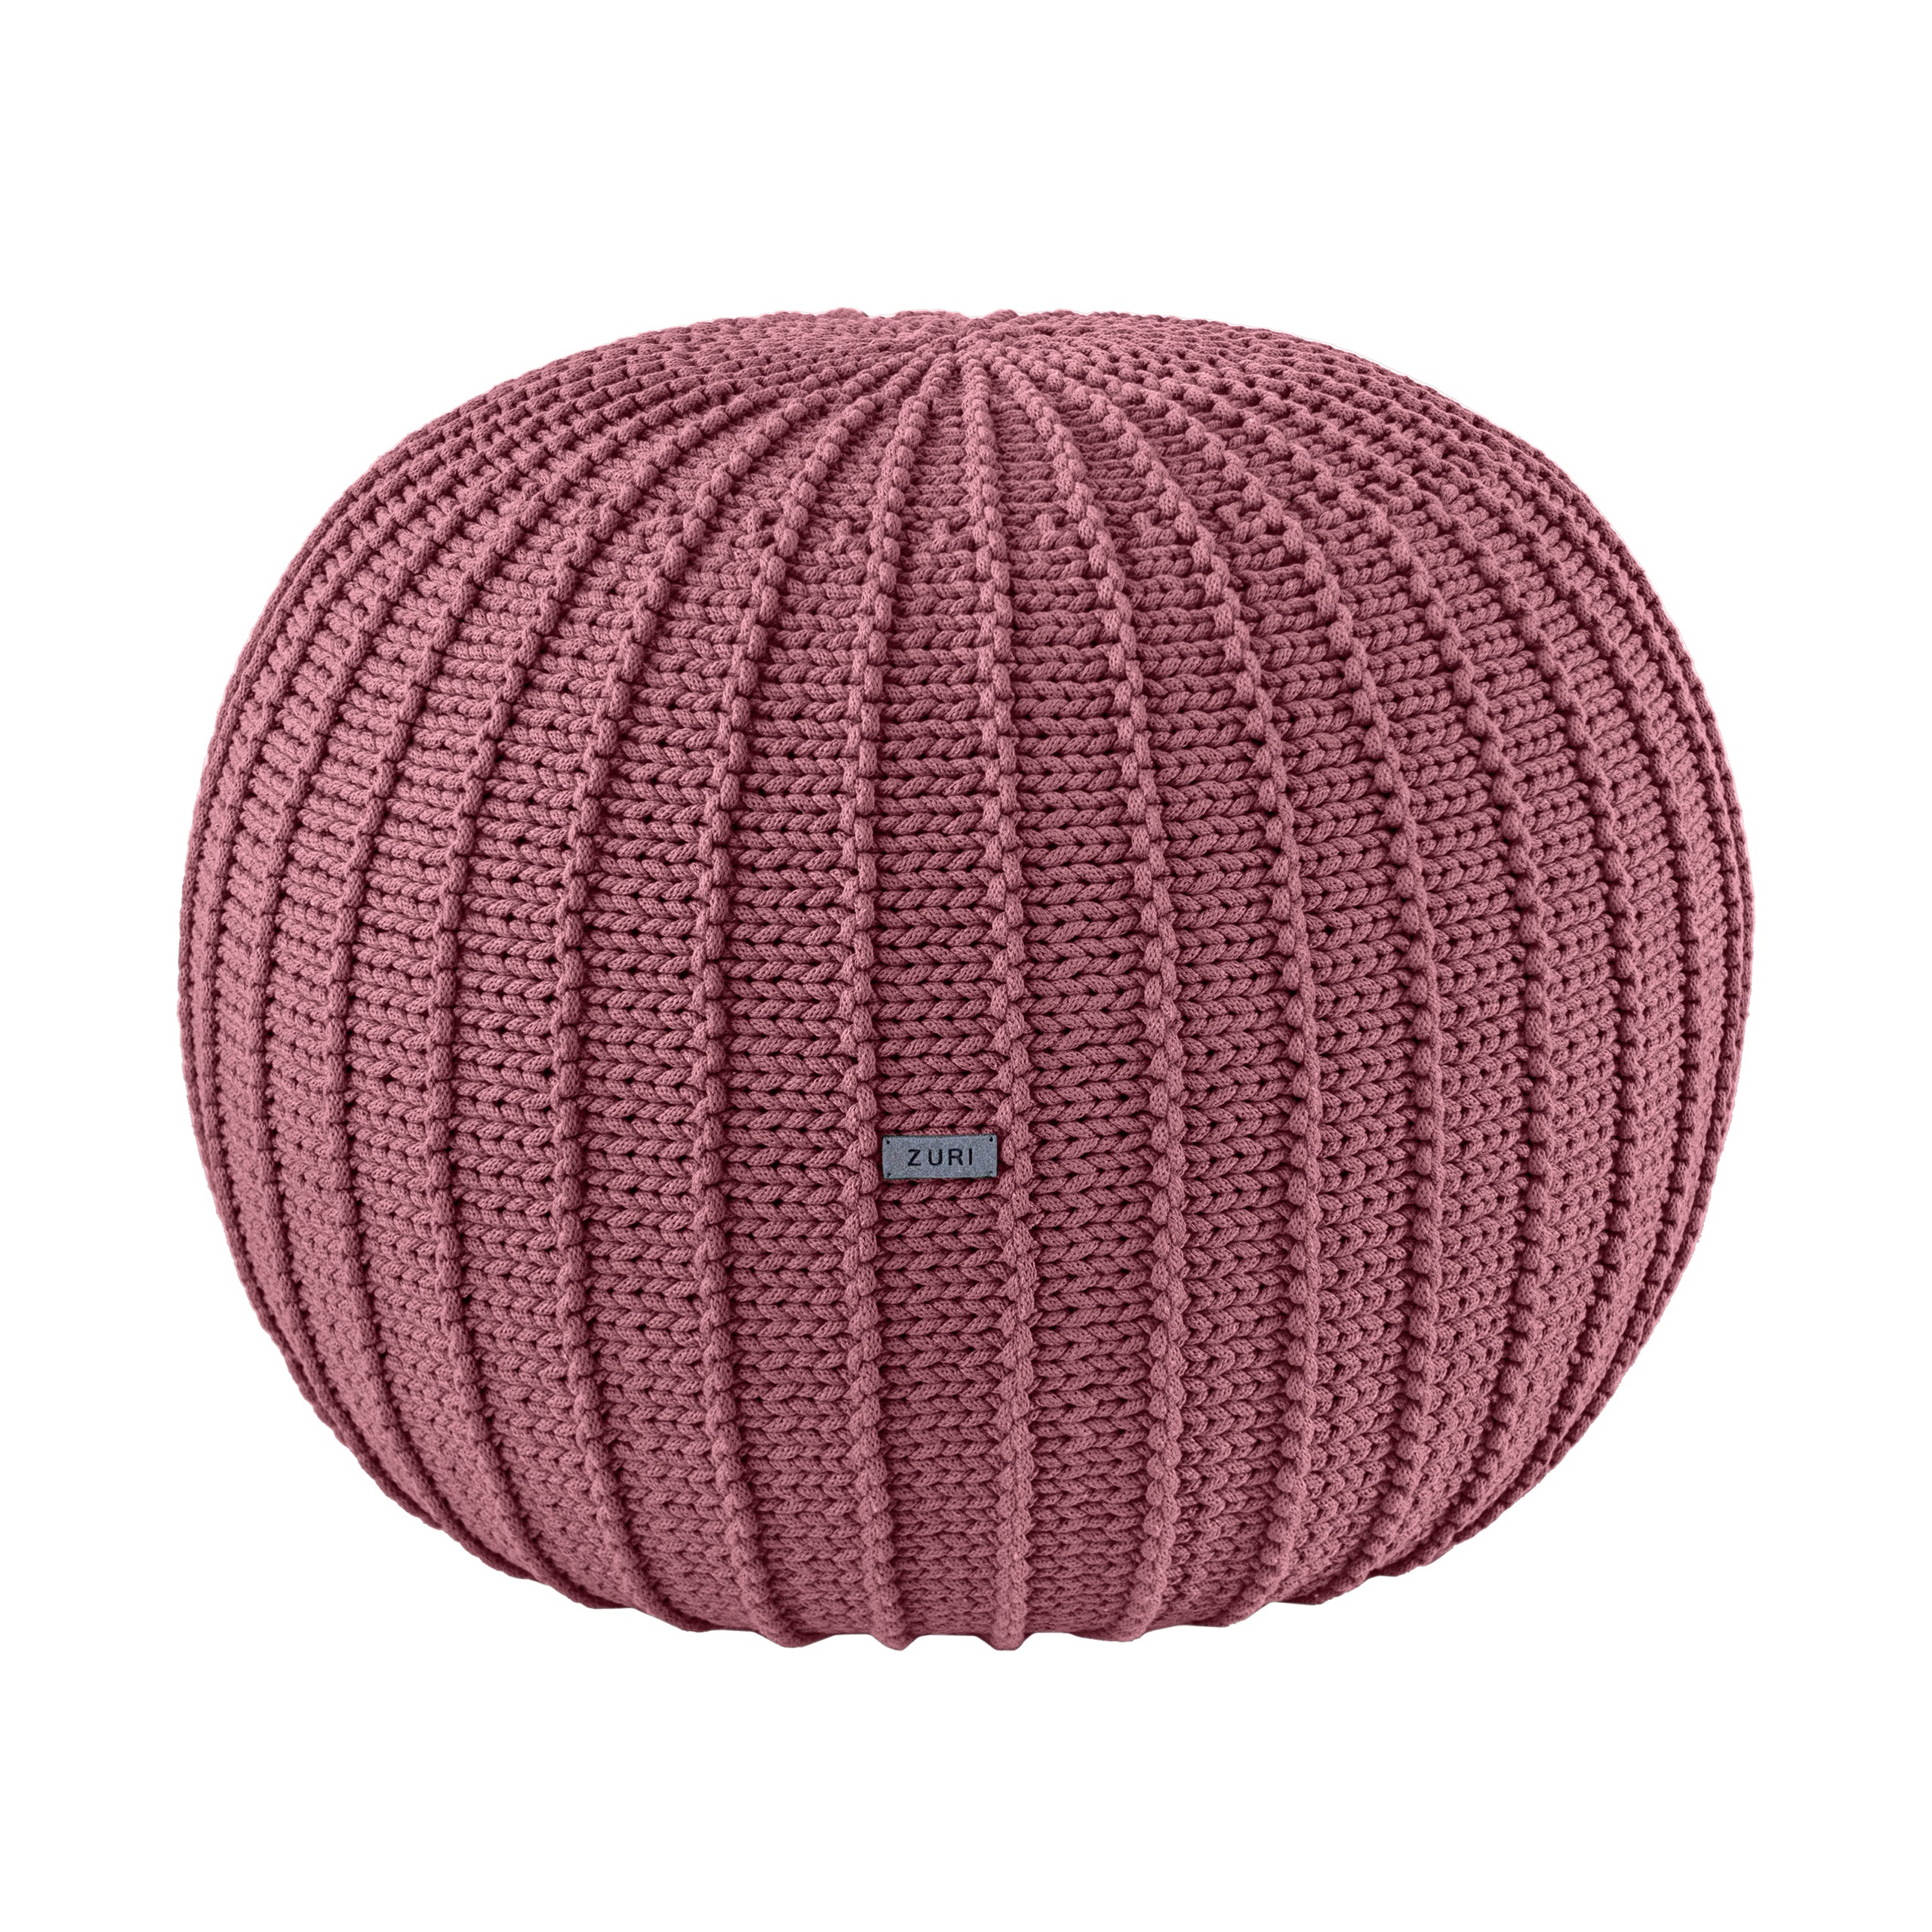 Knitted pouffe, Medium | OLD ROSE